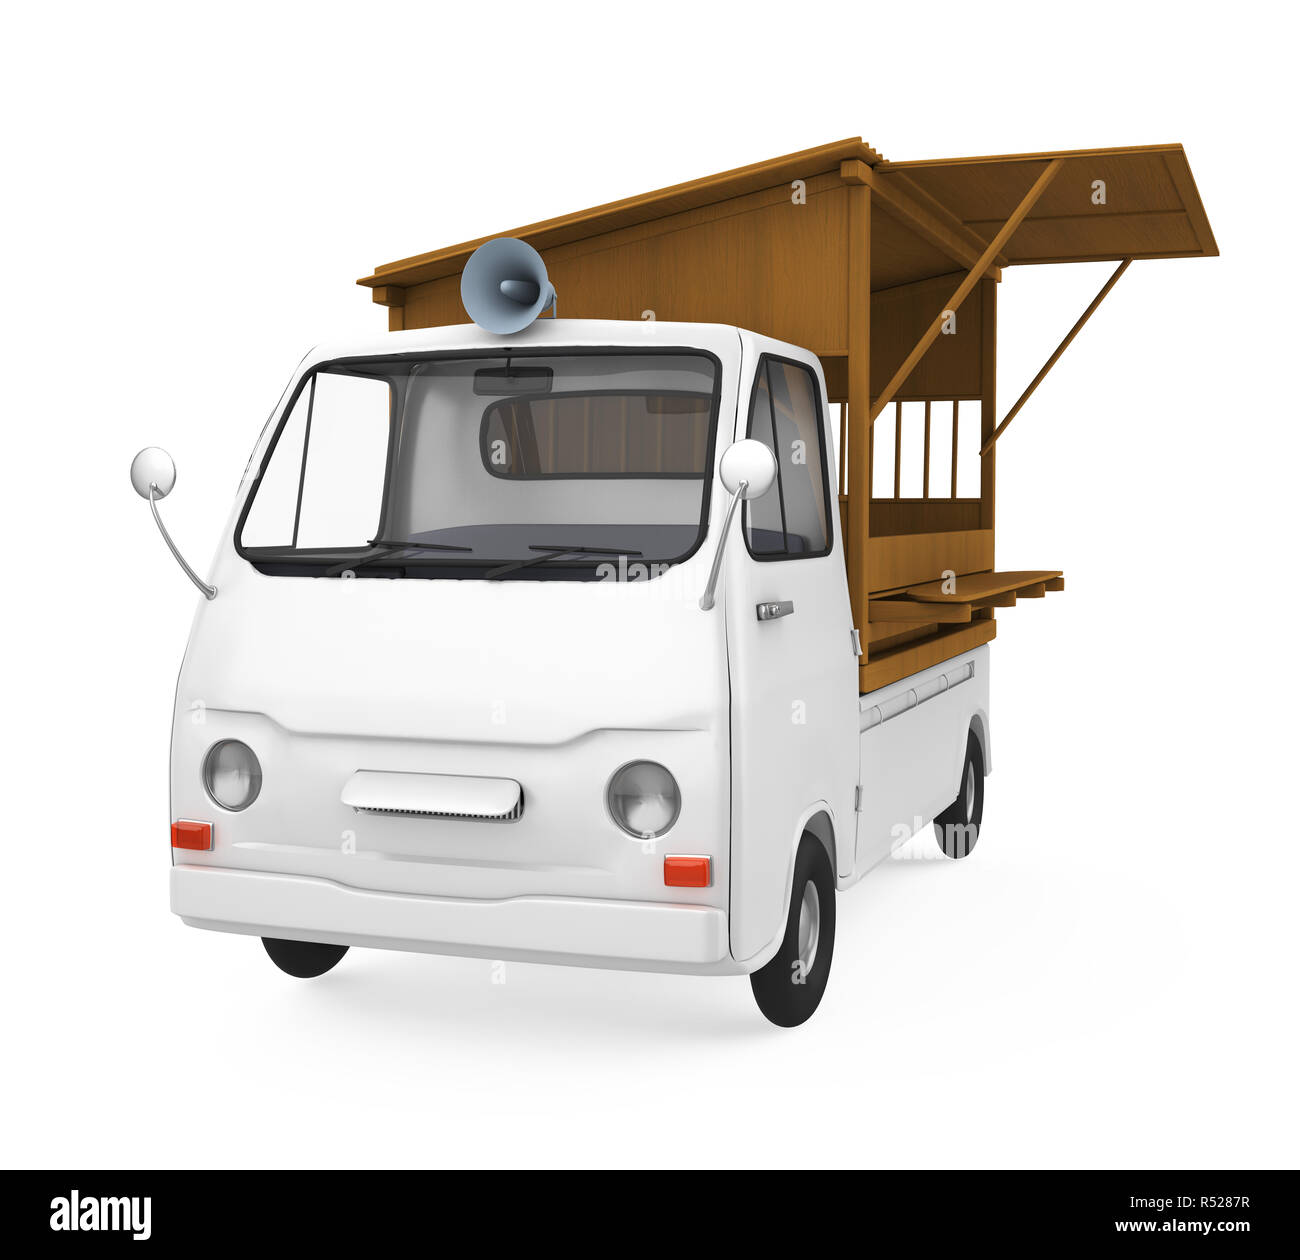 Japanese Food Truck Isolated Stock Photo